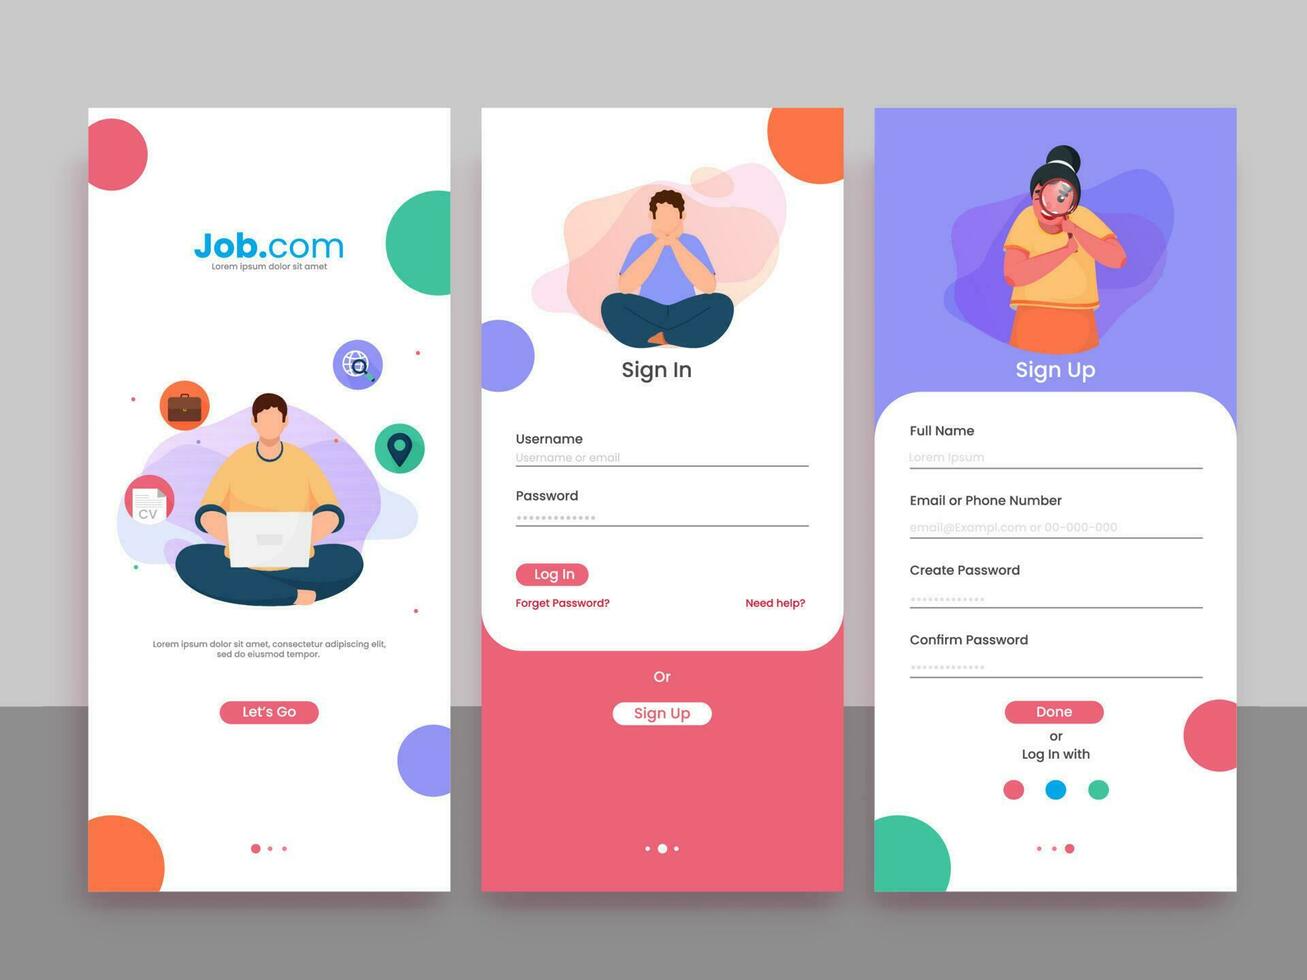 Set Of UI, UX, GUI Screens Job Recruitment App Including Create Account, Sign In, Sign Up For Mobile Application Or Responsive Website. vector